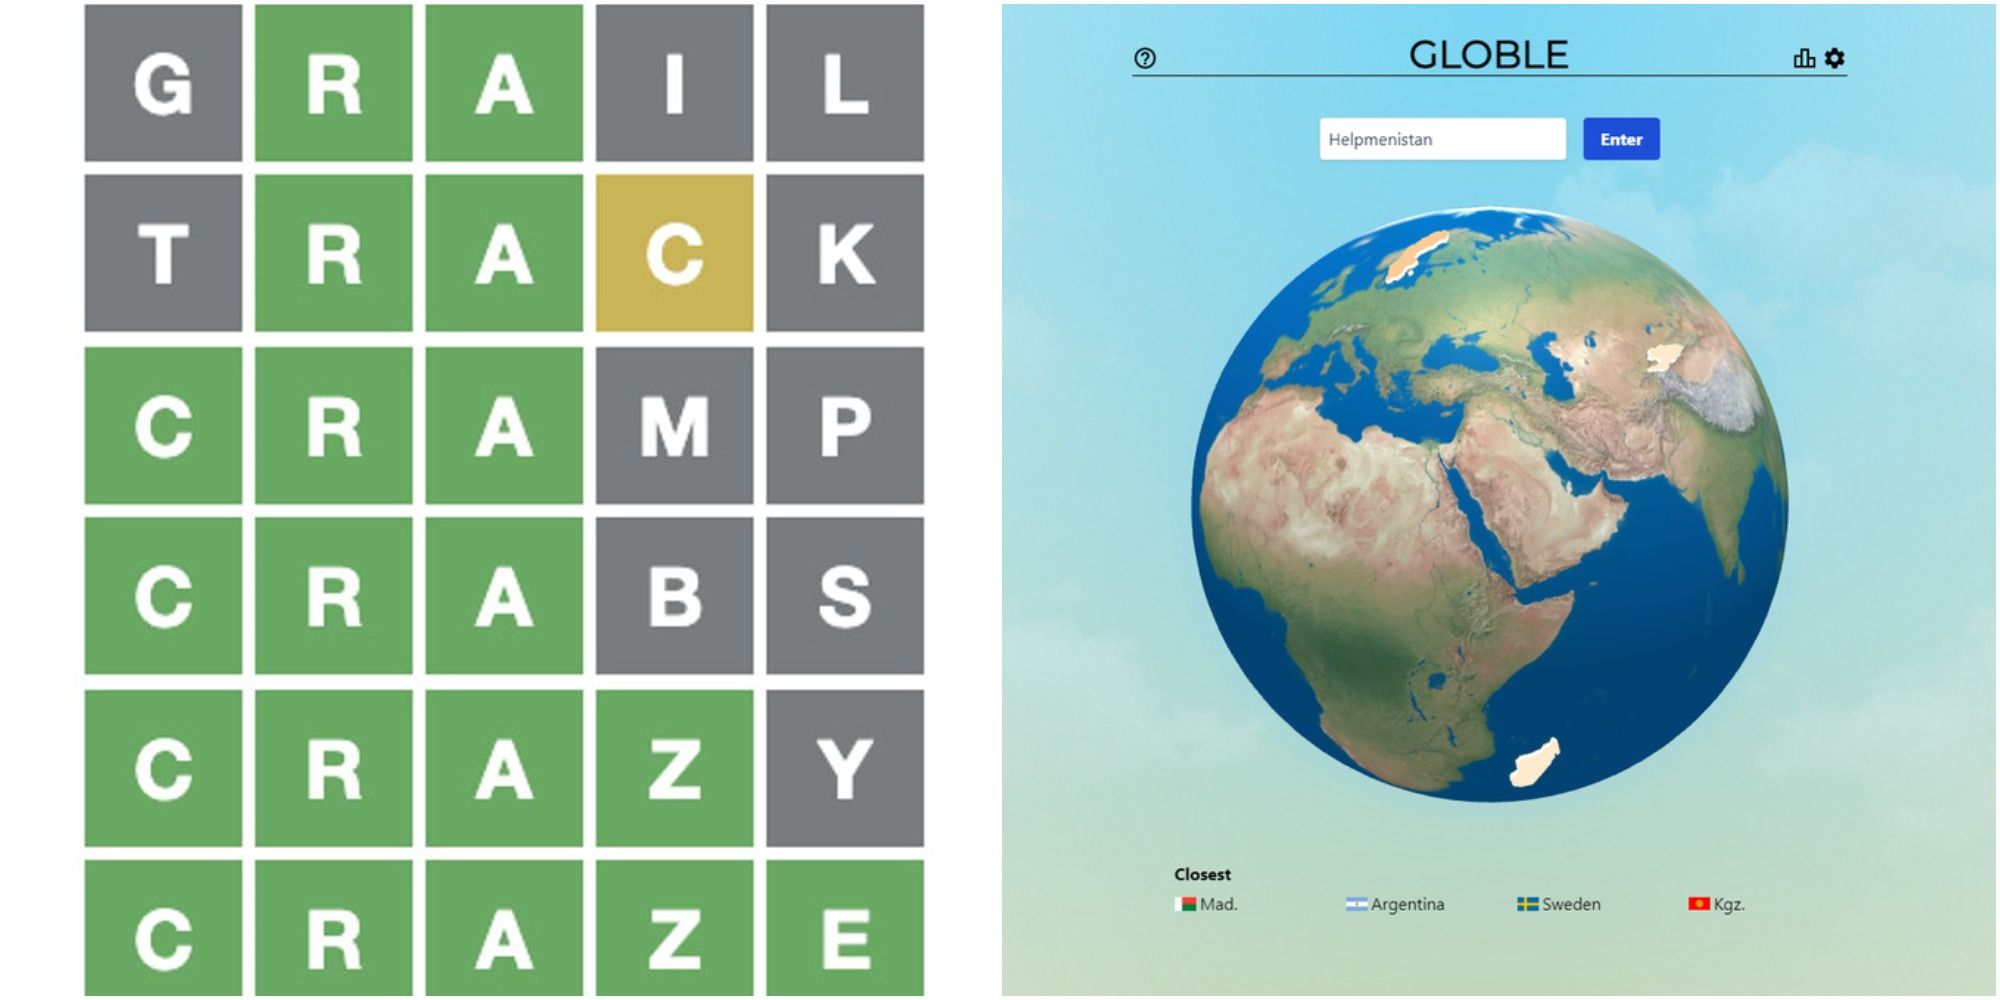 Wordle fans ditch word game for new mystery country spin-off called  'Worldle' - Mirror Online